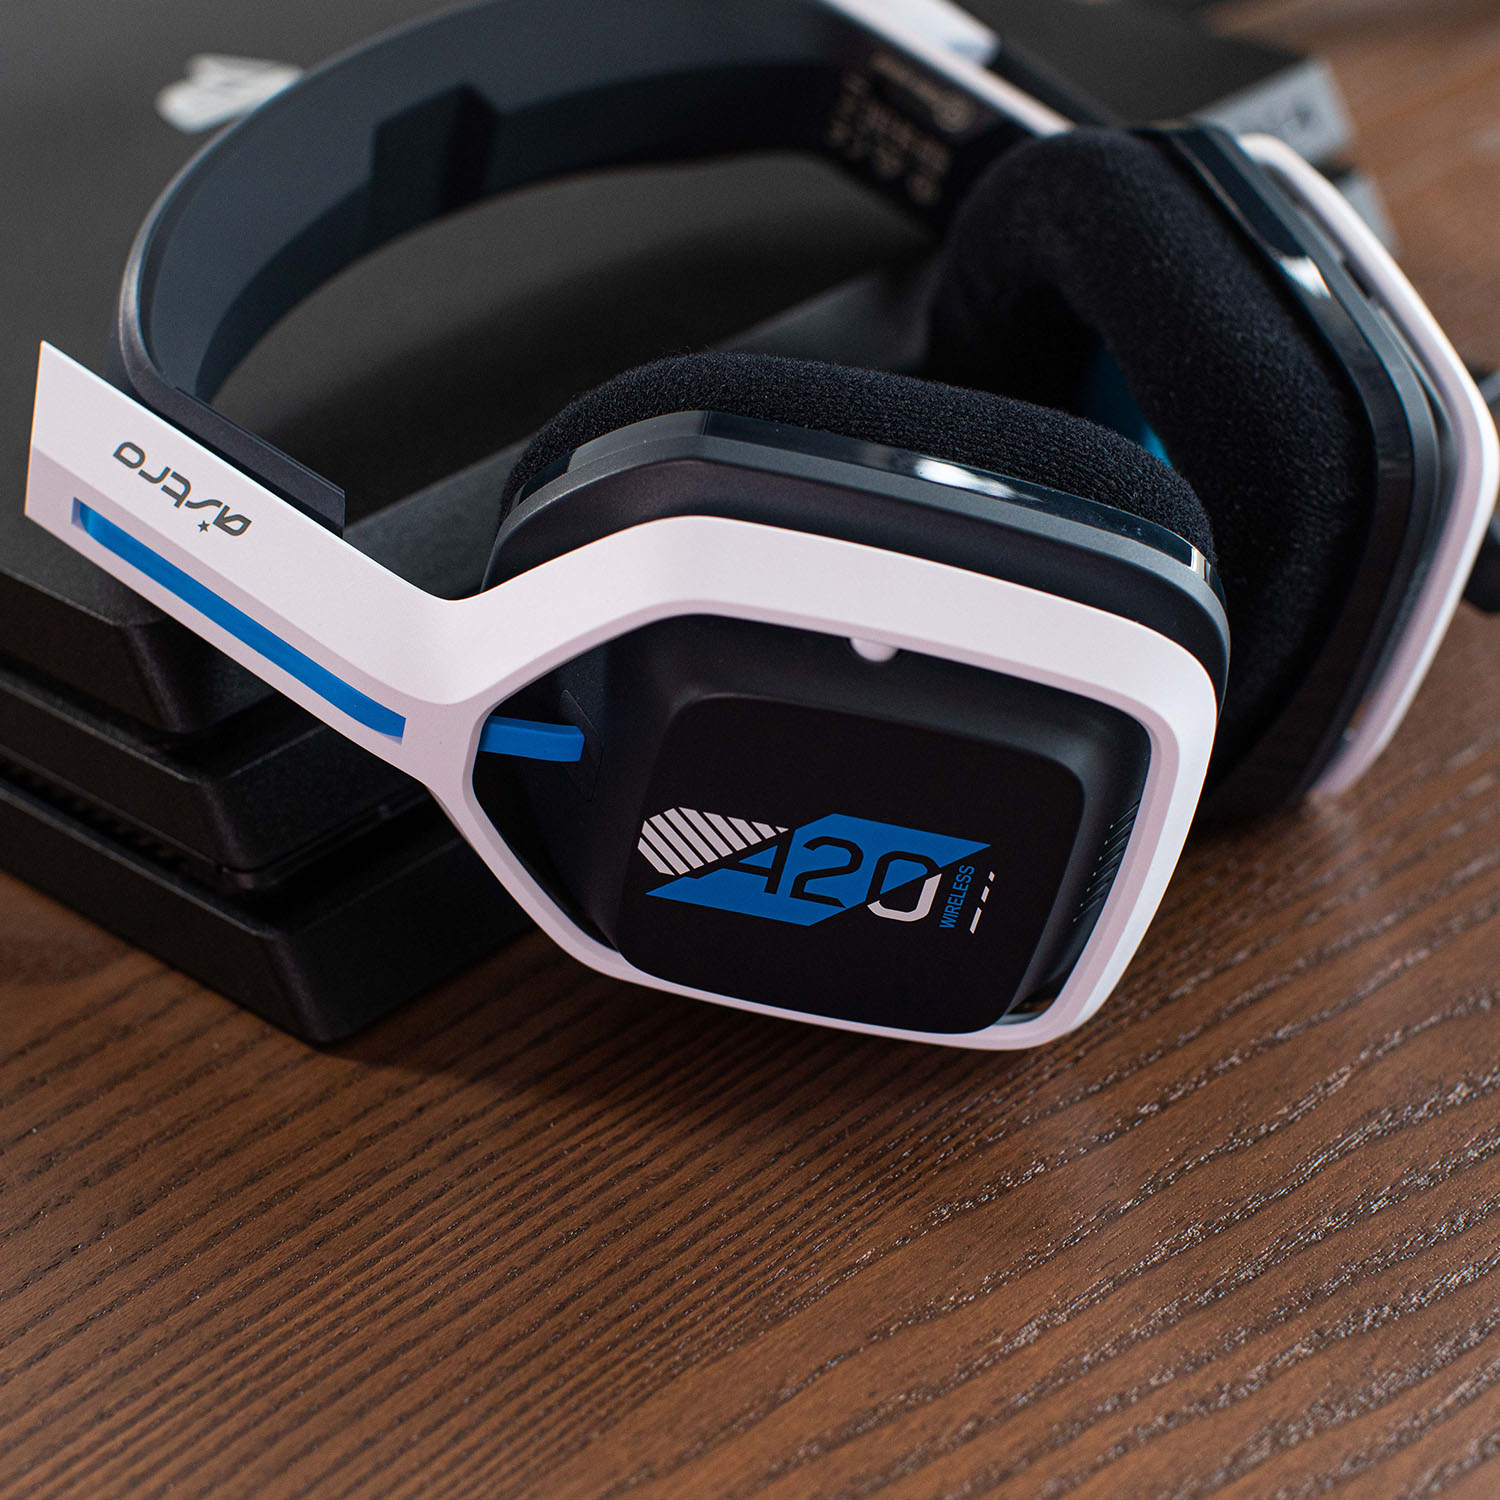 Astro A20 Wireless Gaming Headset For Xbox one/PC/Mac